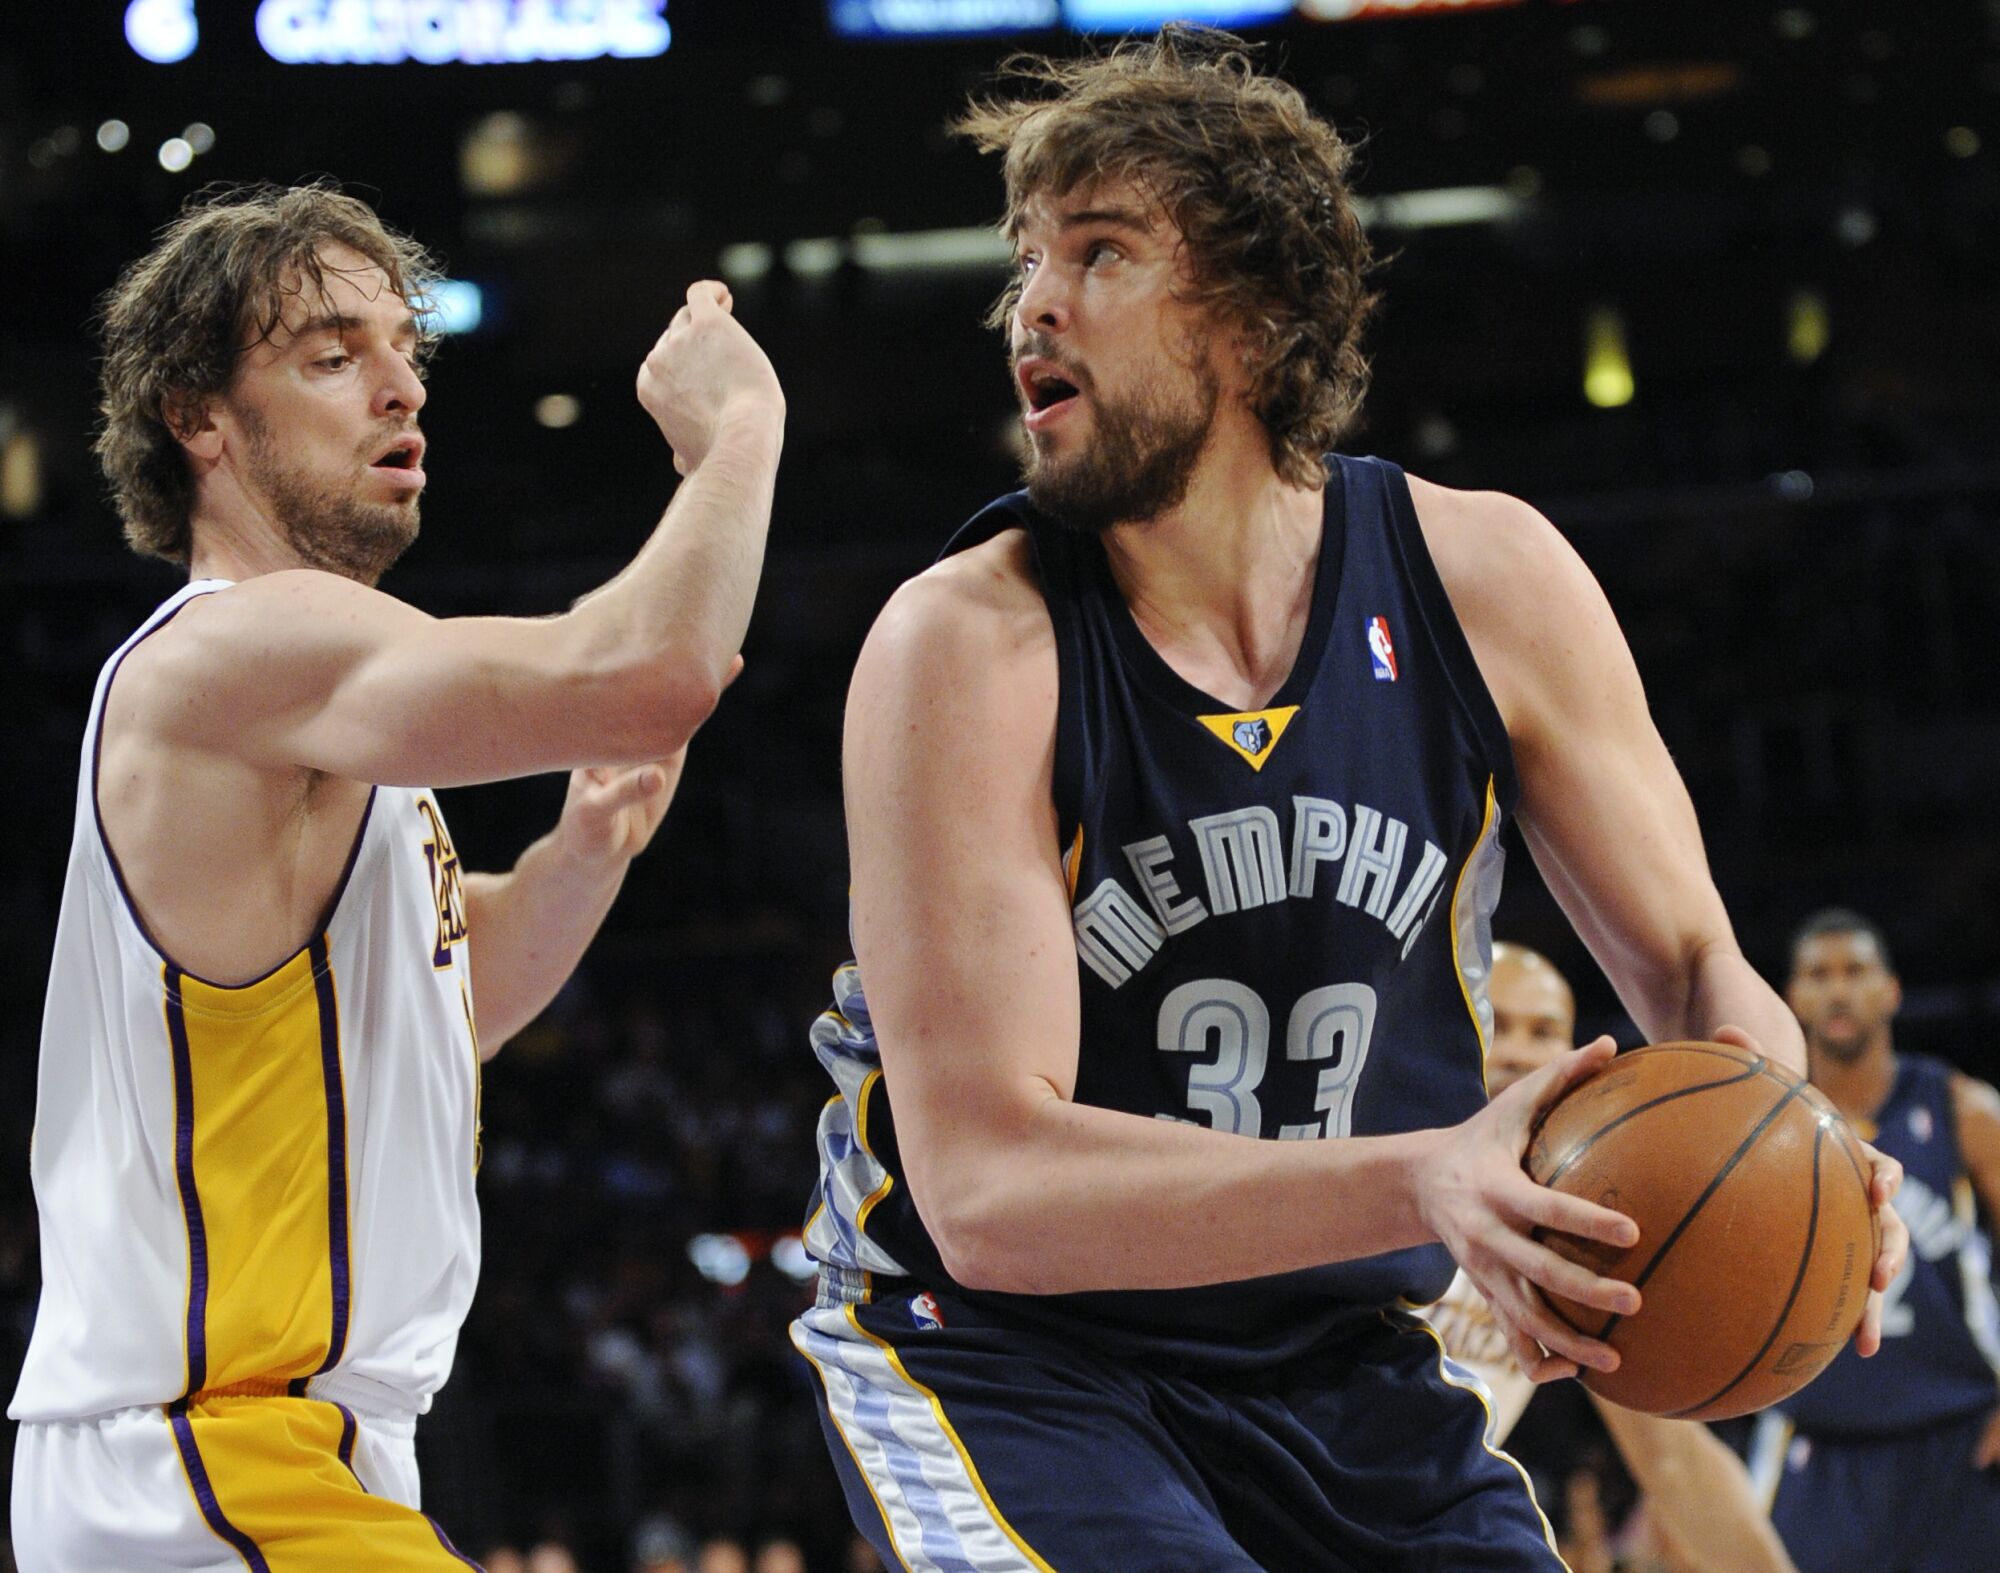 Lakers forward Pau Gasol, left, defends his brother, Grizzlies center Marc Gasol, during a game March 3, 2009 in L.A.